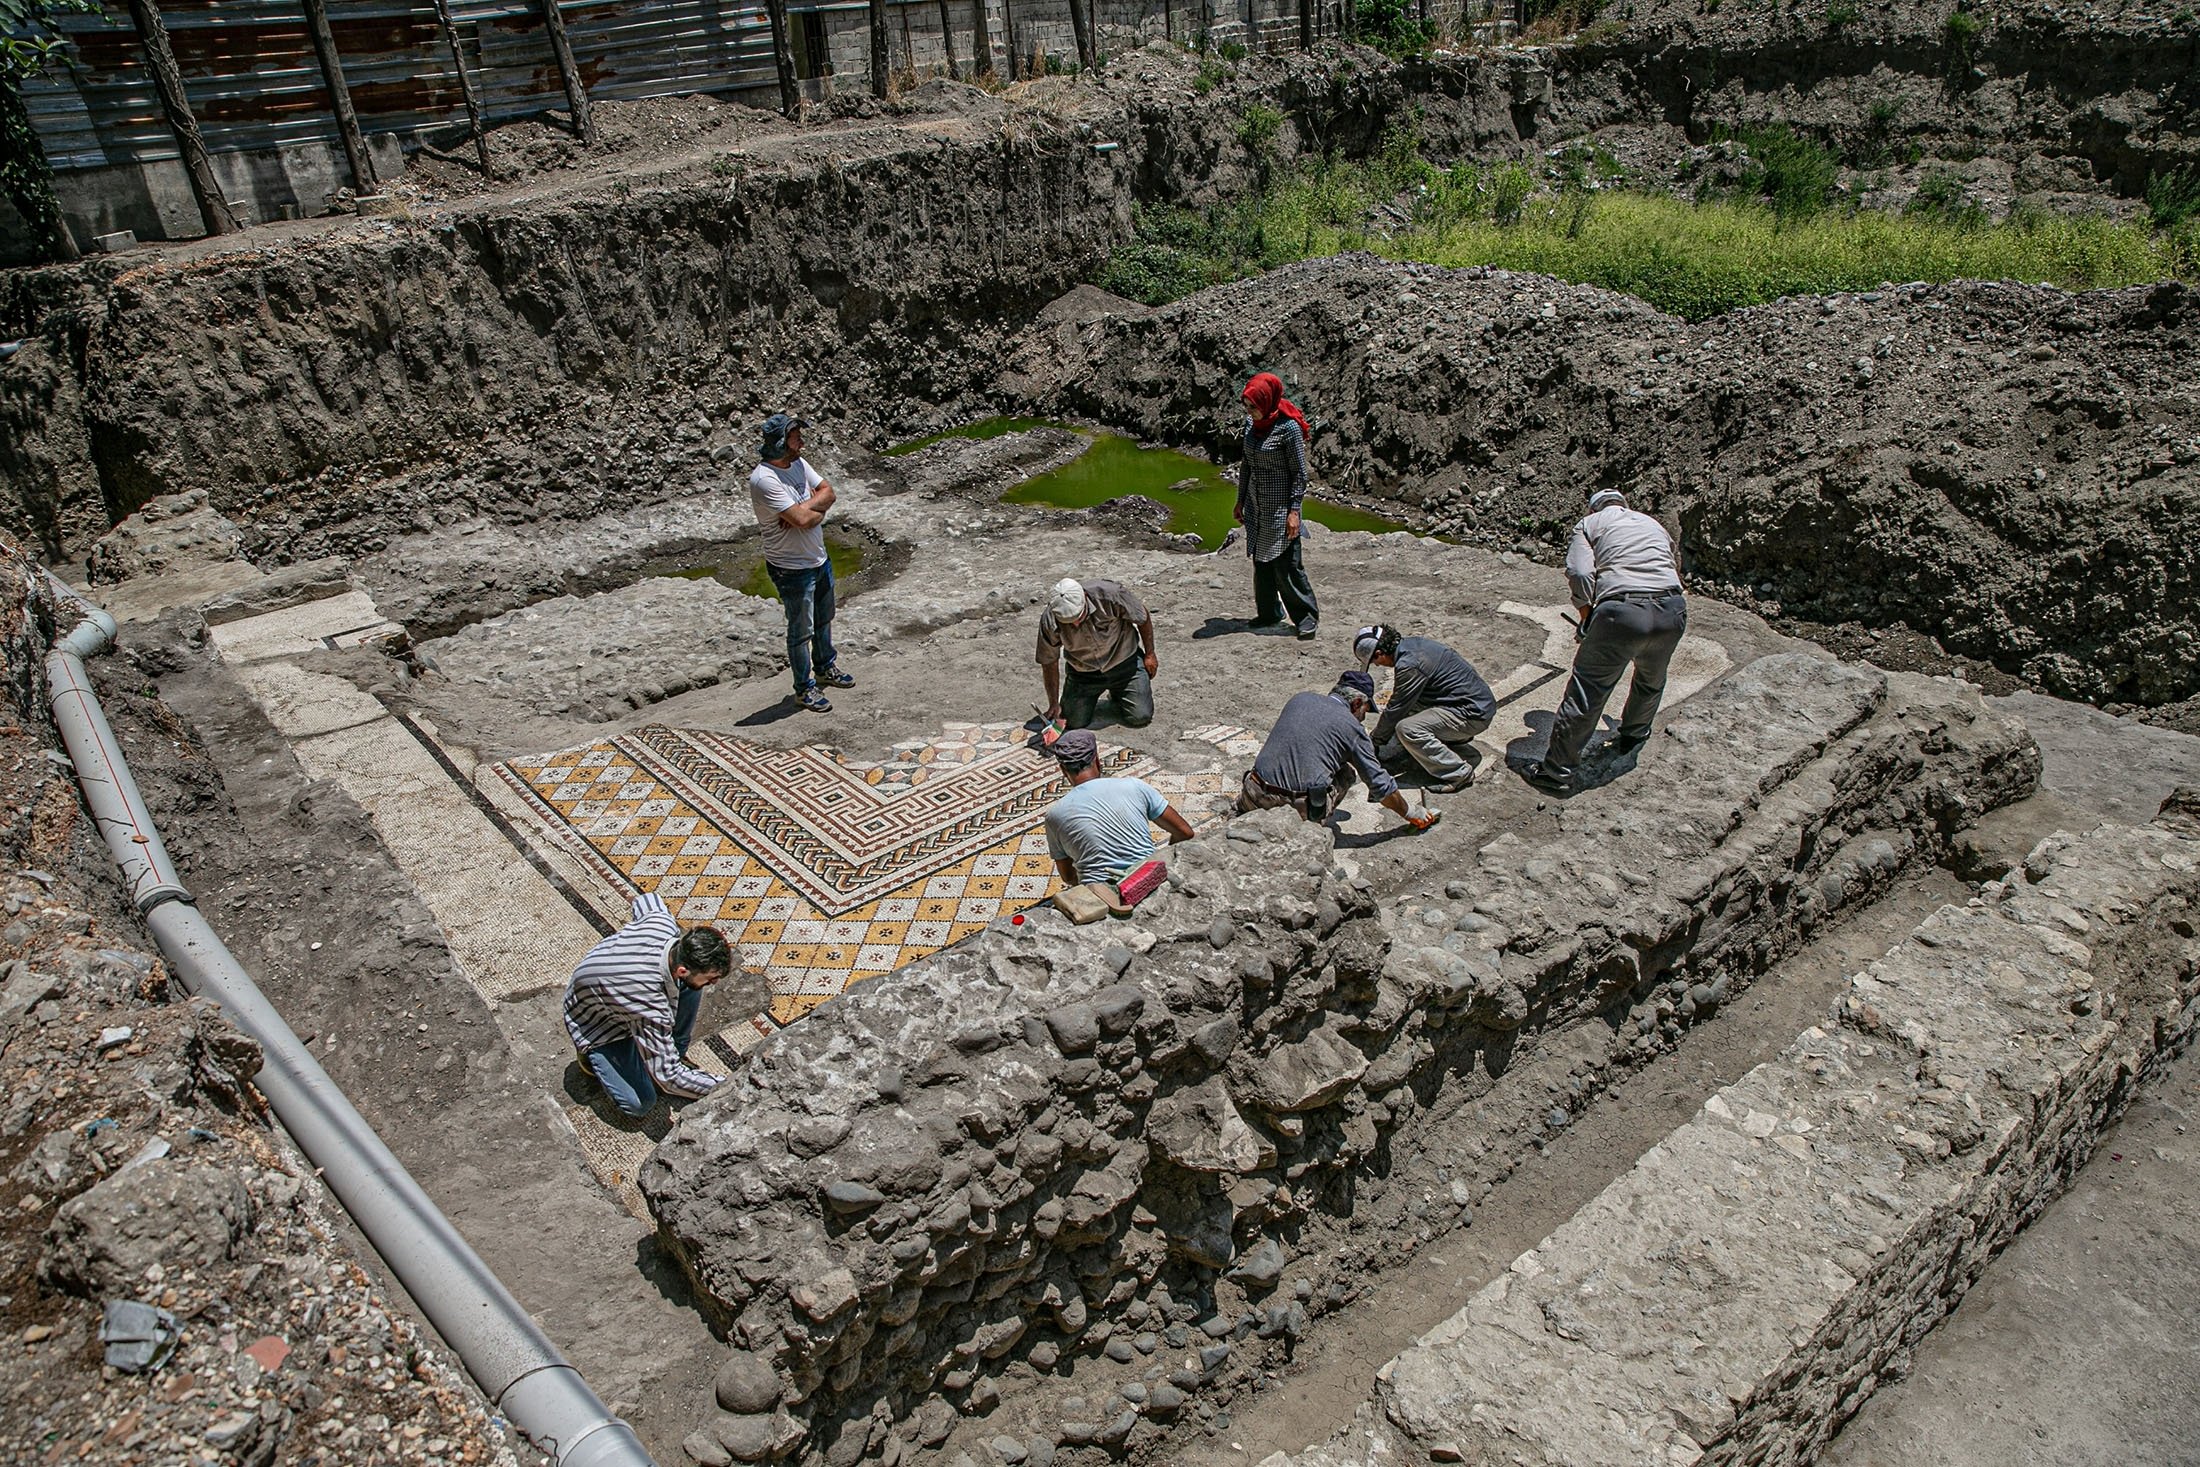 Workers clean the mosaic on the floor of a recently discovered Roman villa in the Defne district of Hatay, southern Turkey, July 4, 2022. (AA Photo)